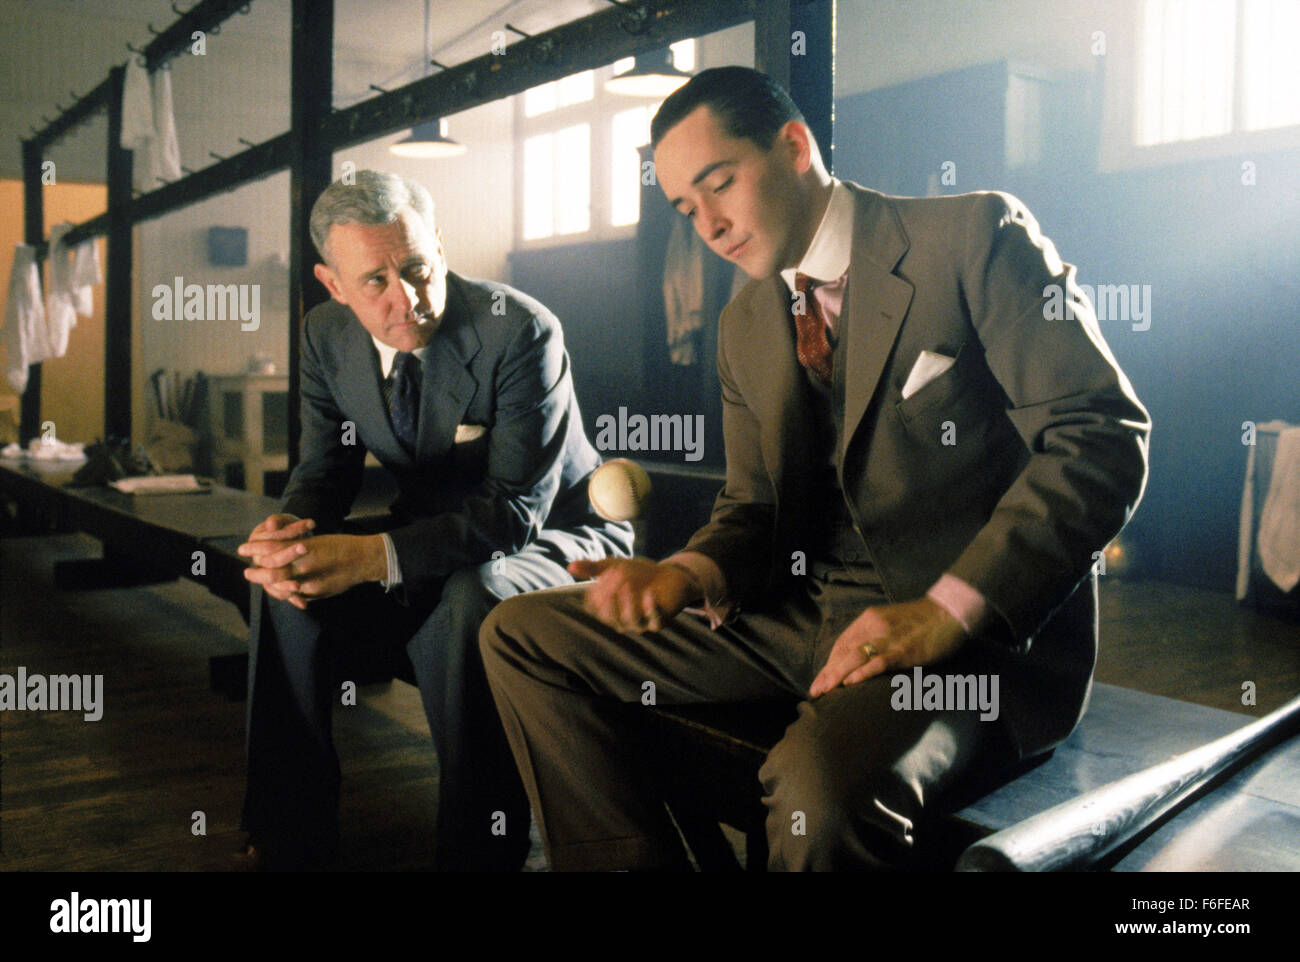 Sep 02, 1988; Chicago, IL, USA; JOHN MAHONEY (left) as William 'Kid' Gleason and JOHN CUSACK as George 'Buck' Weaver in the sport, drama, history film 'Eight Men Out' directed by John Sayles. Stock Photo